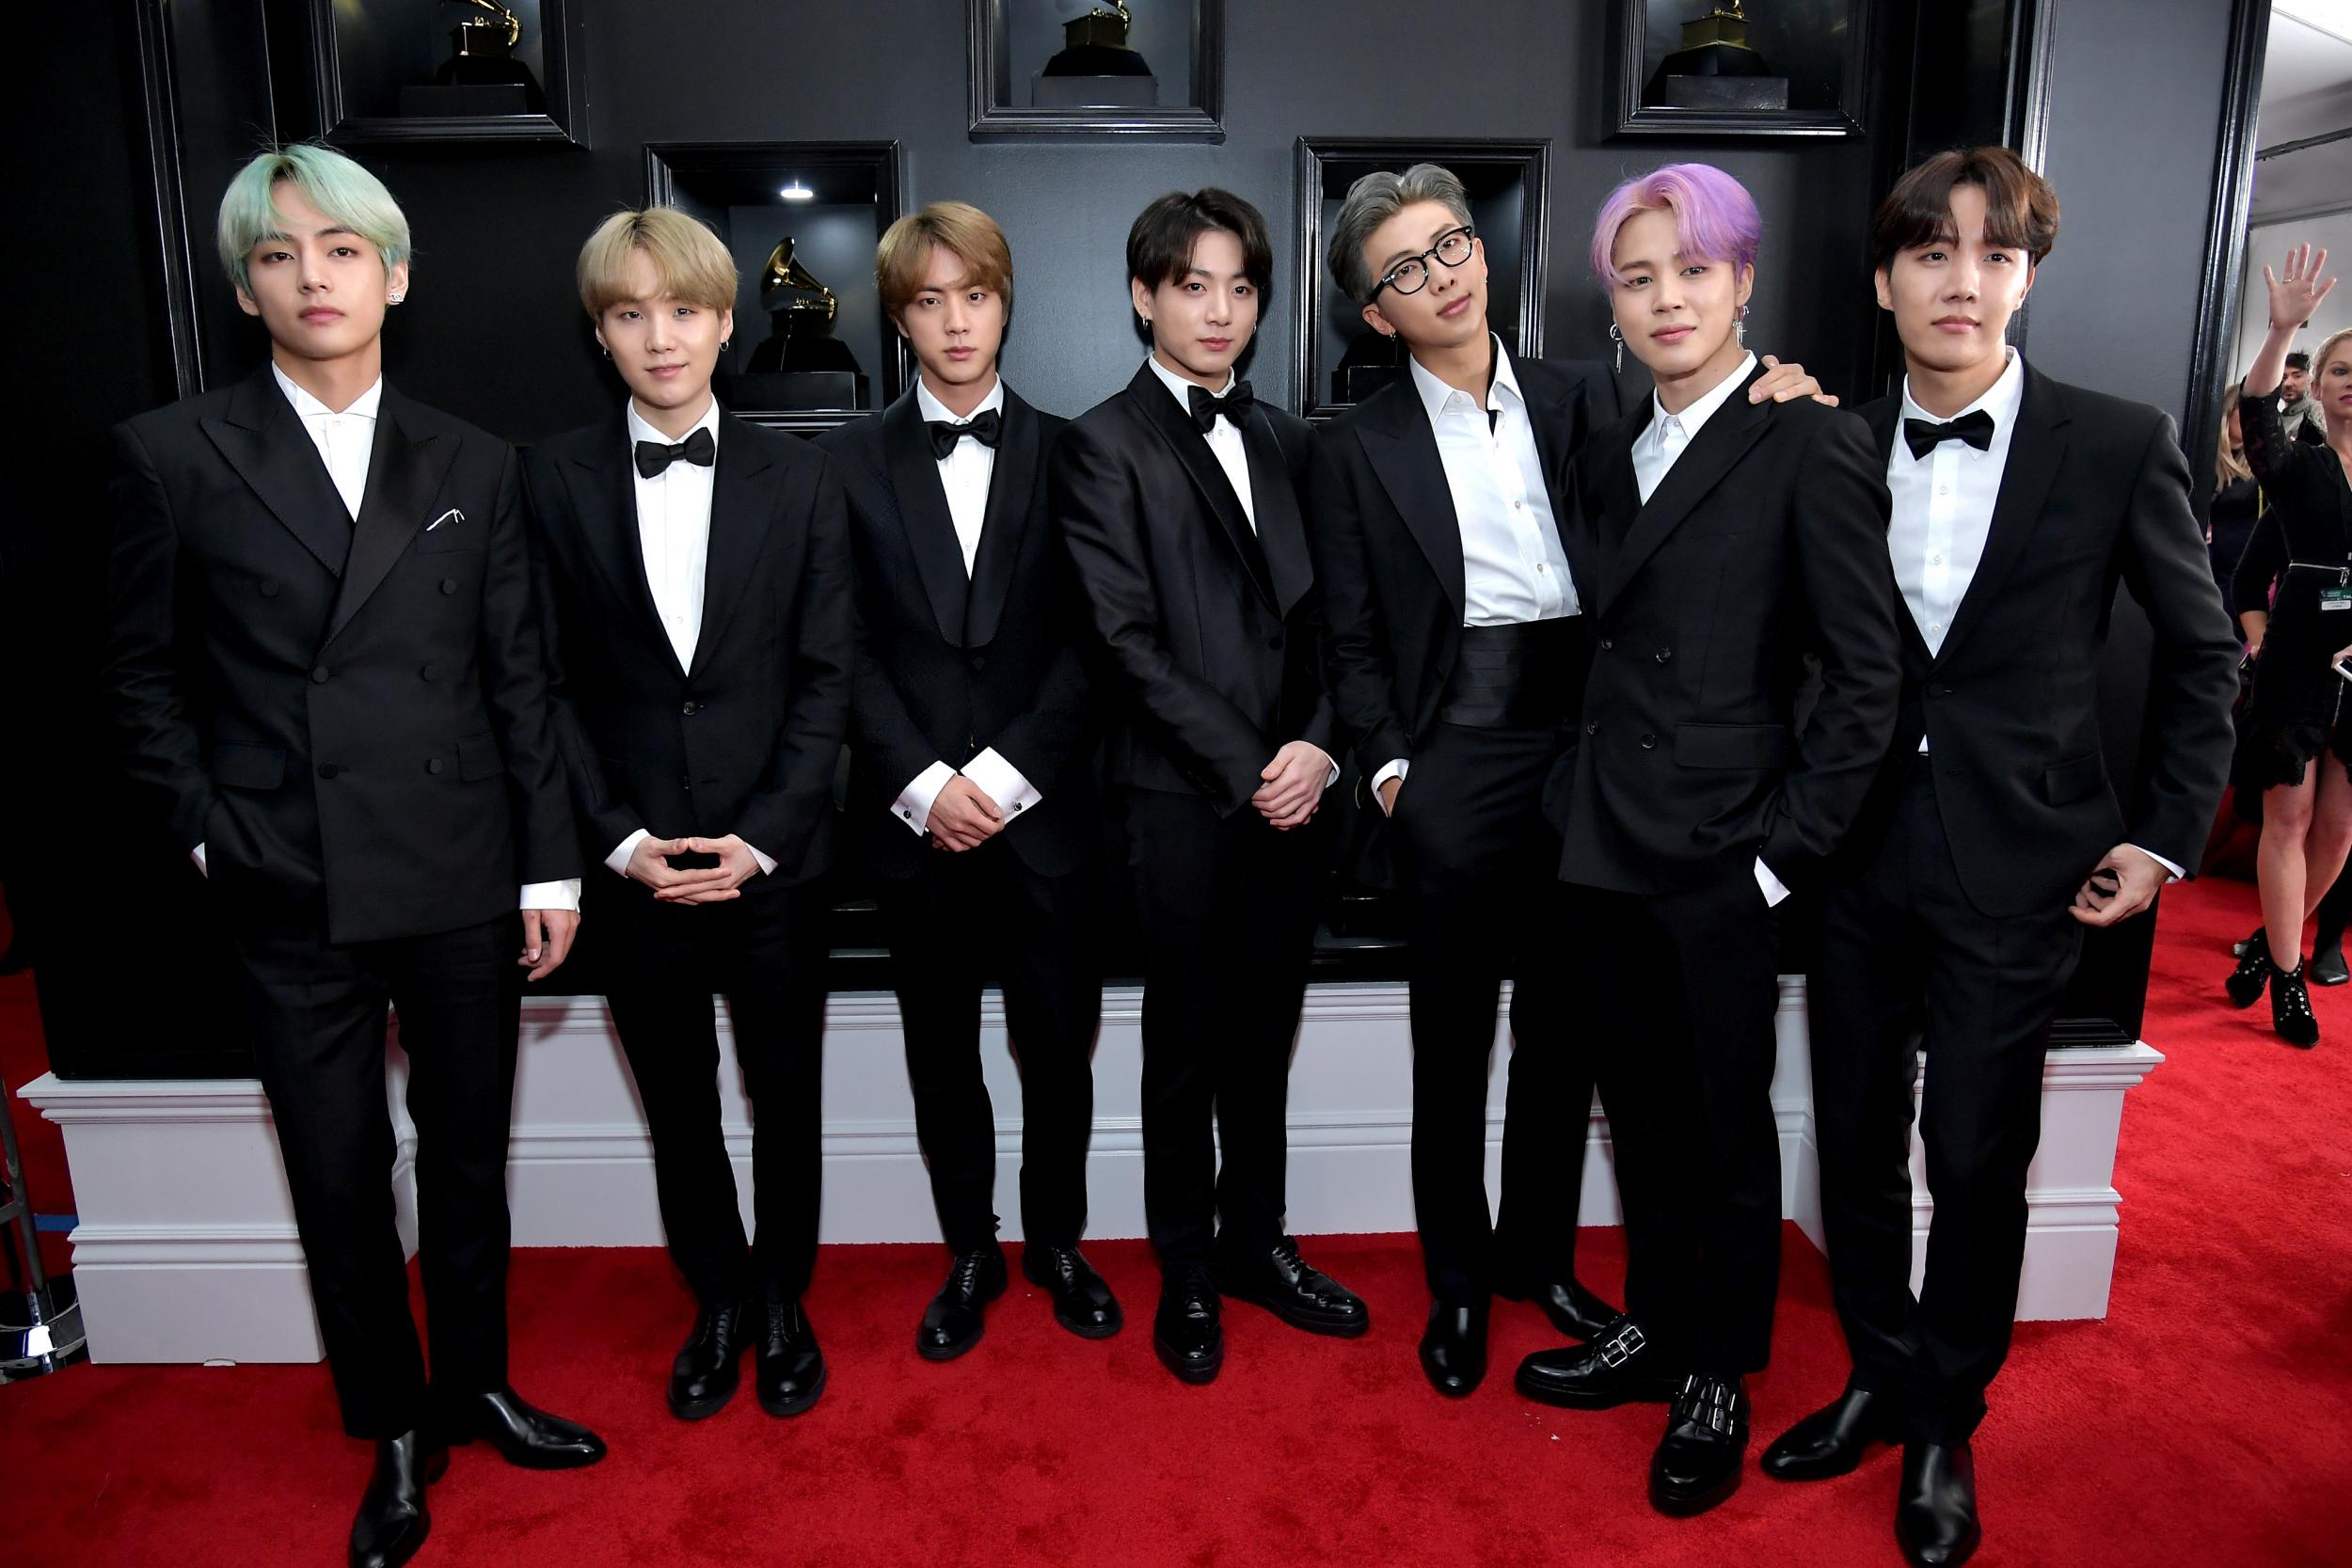 BTS Wembley tickets: How to see the K Pop stars perform live in London | The Independent